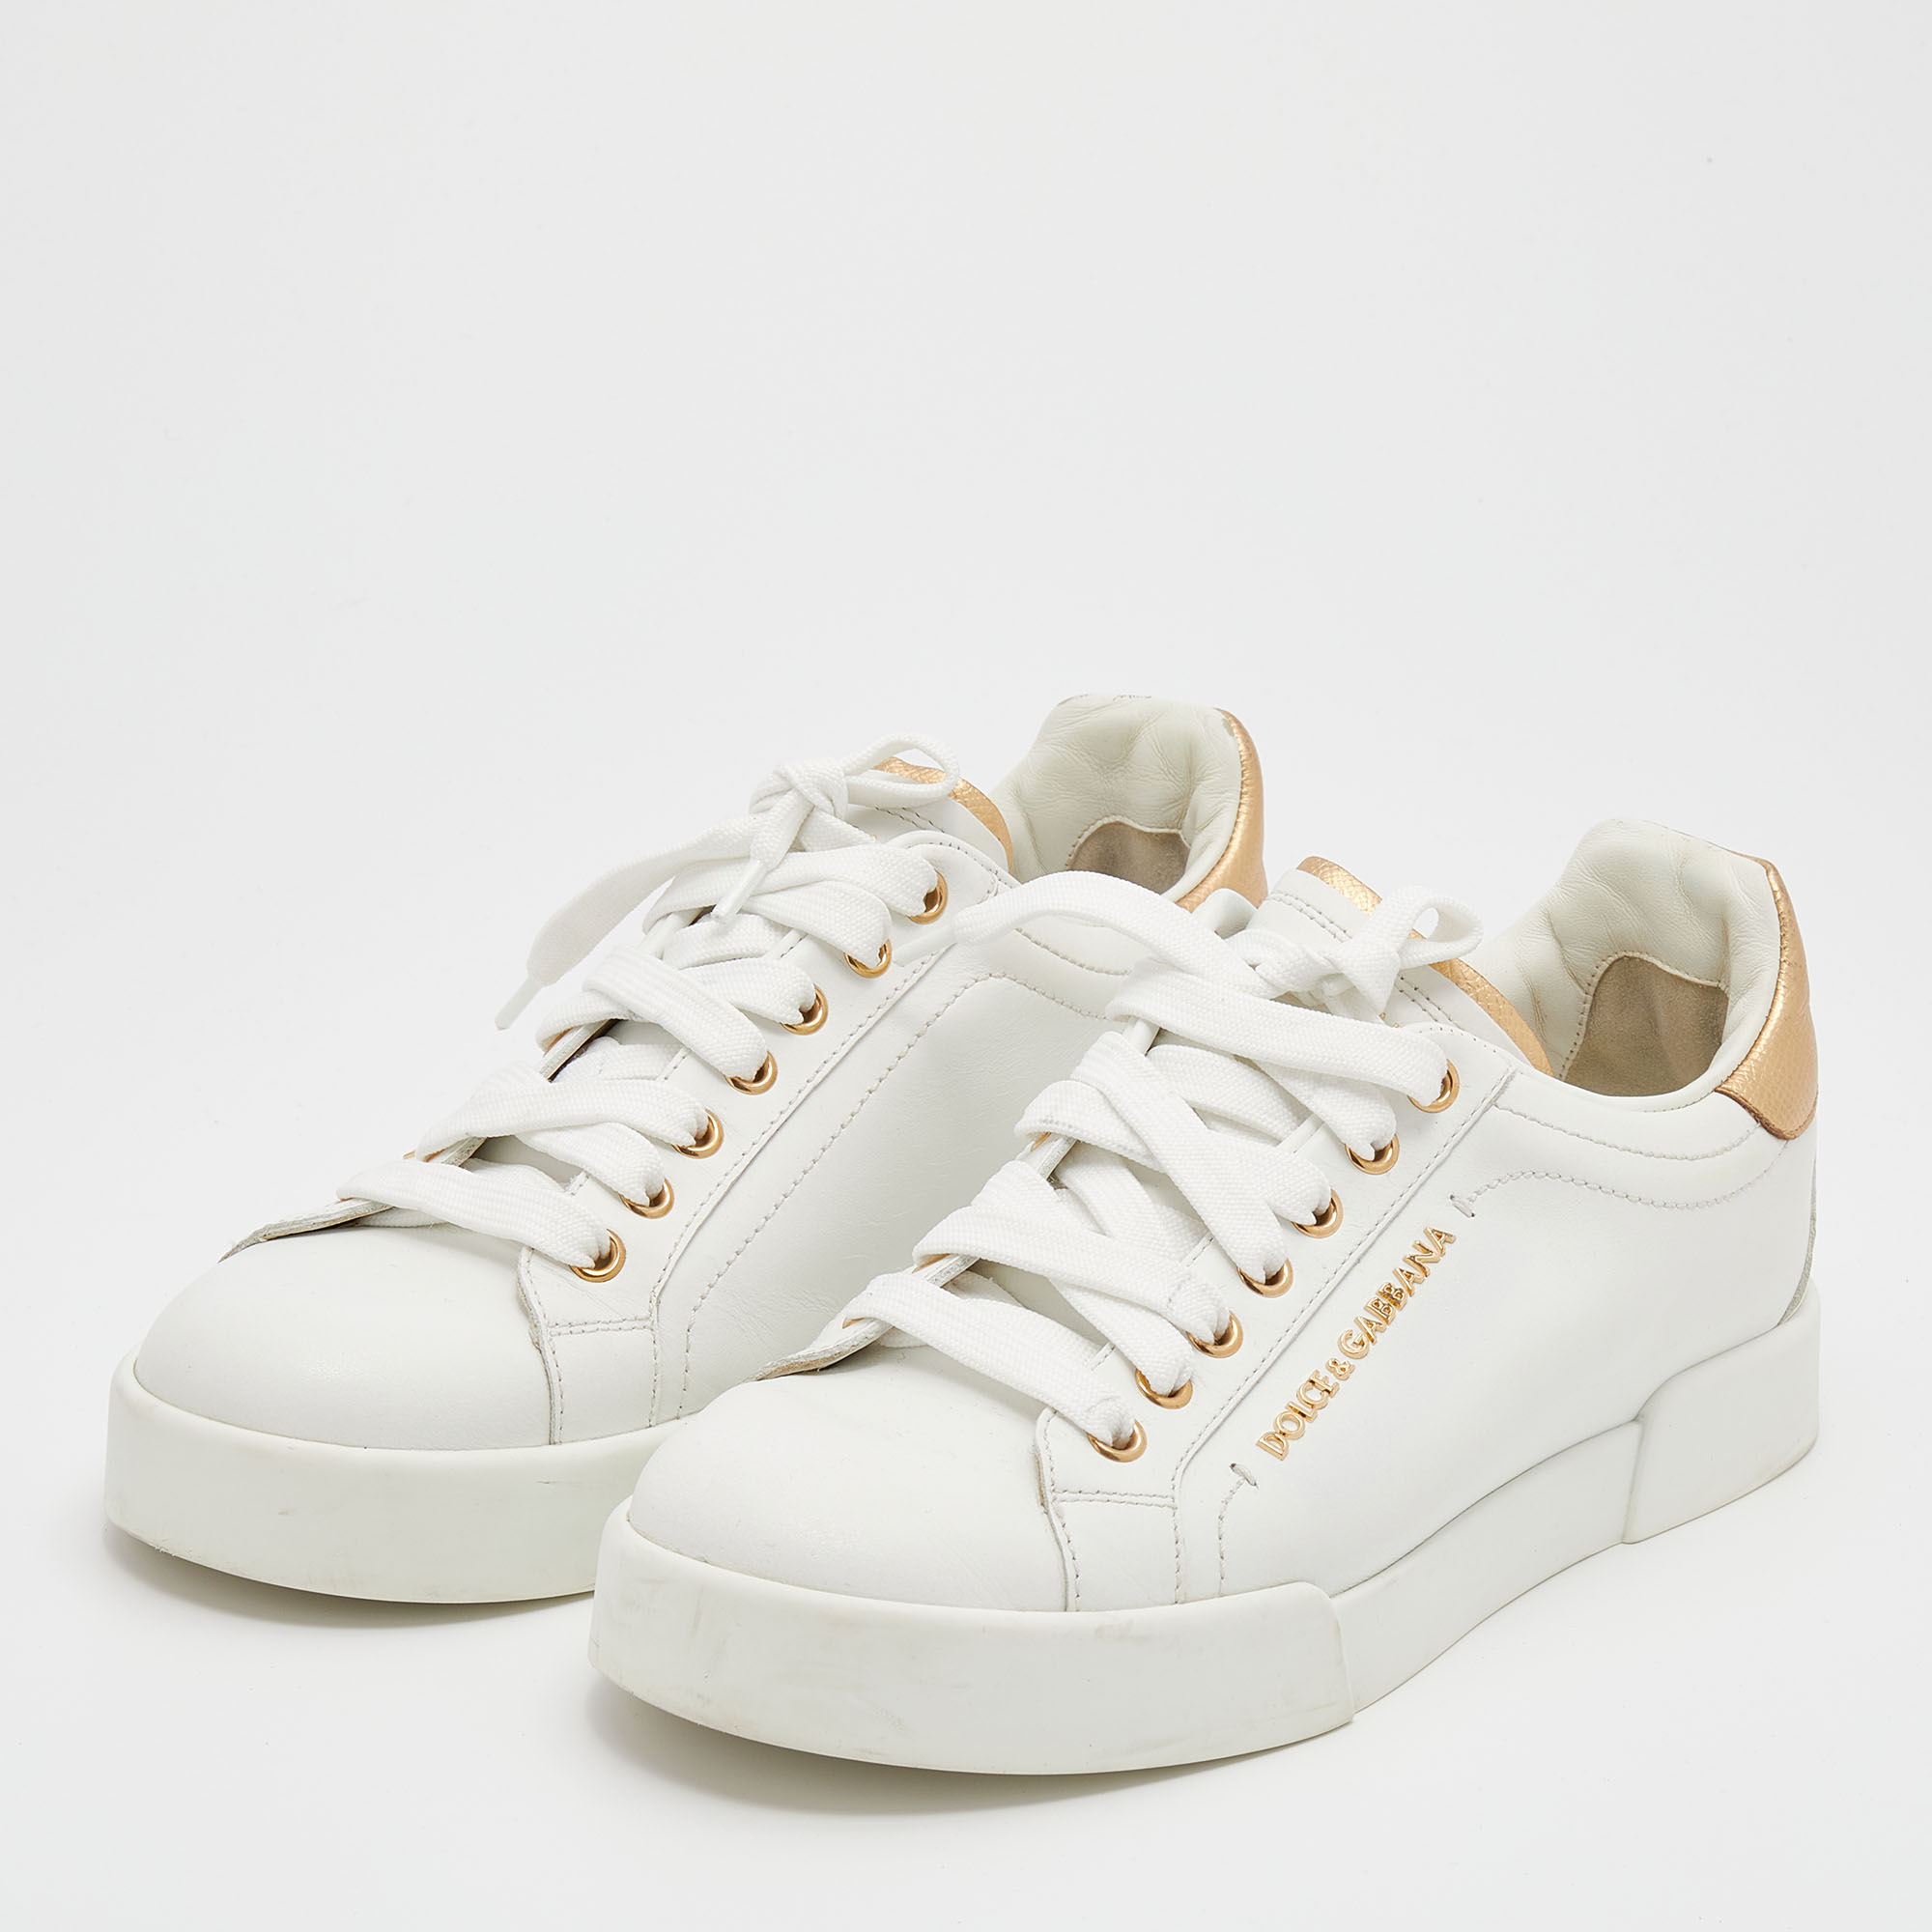 

Dolce & Gabbana White/Gold Leather Portofino Embellished Low Top Sneakers Size